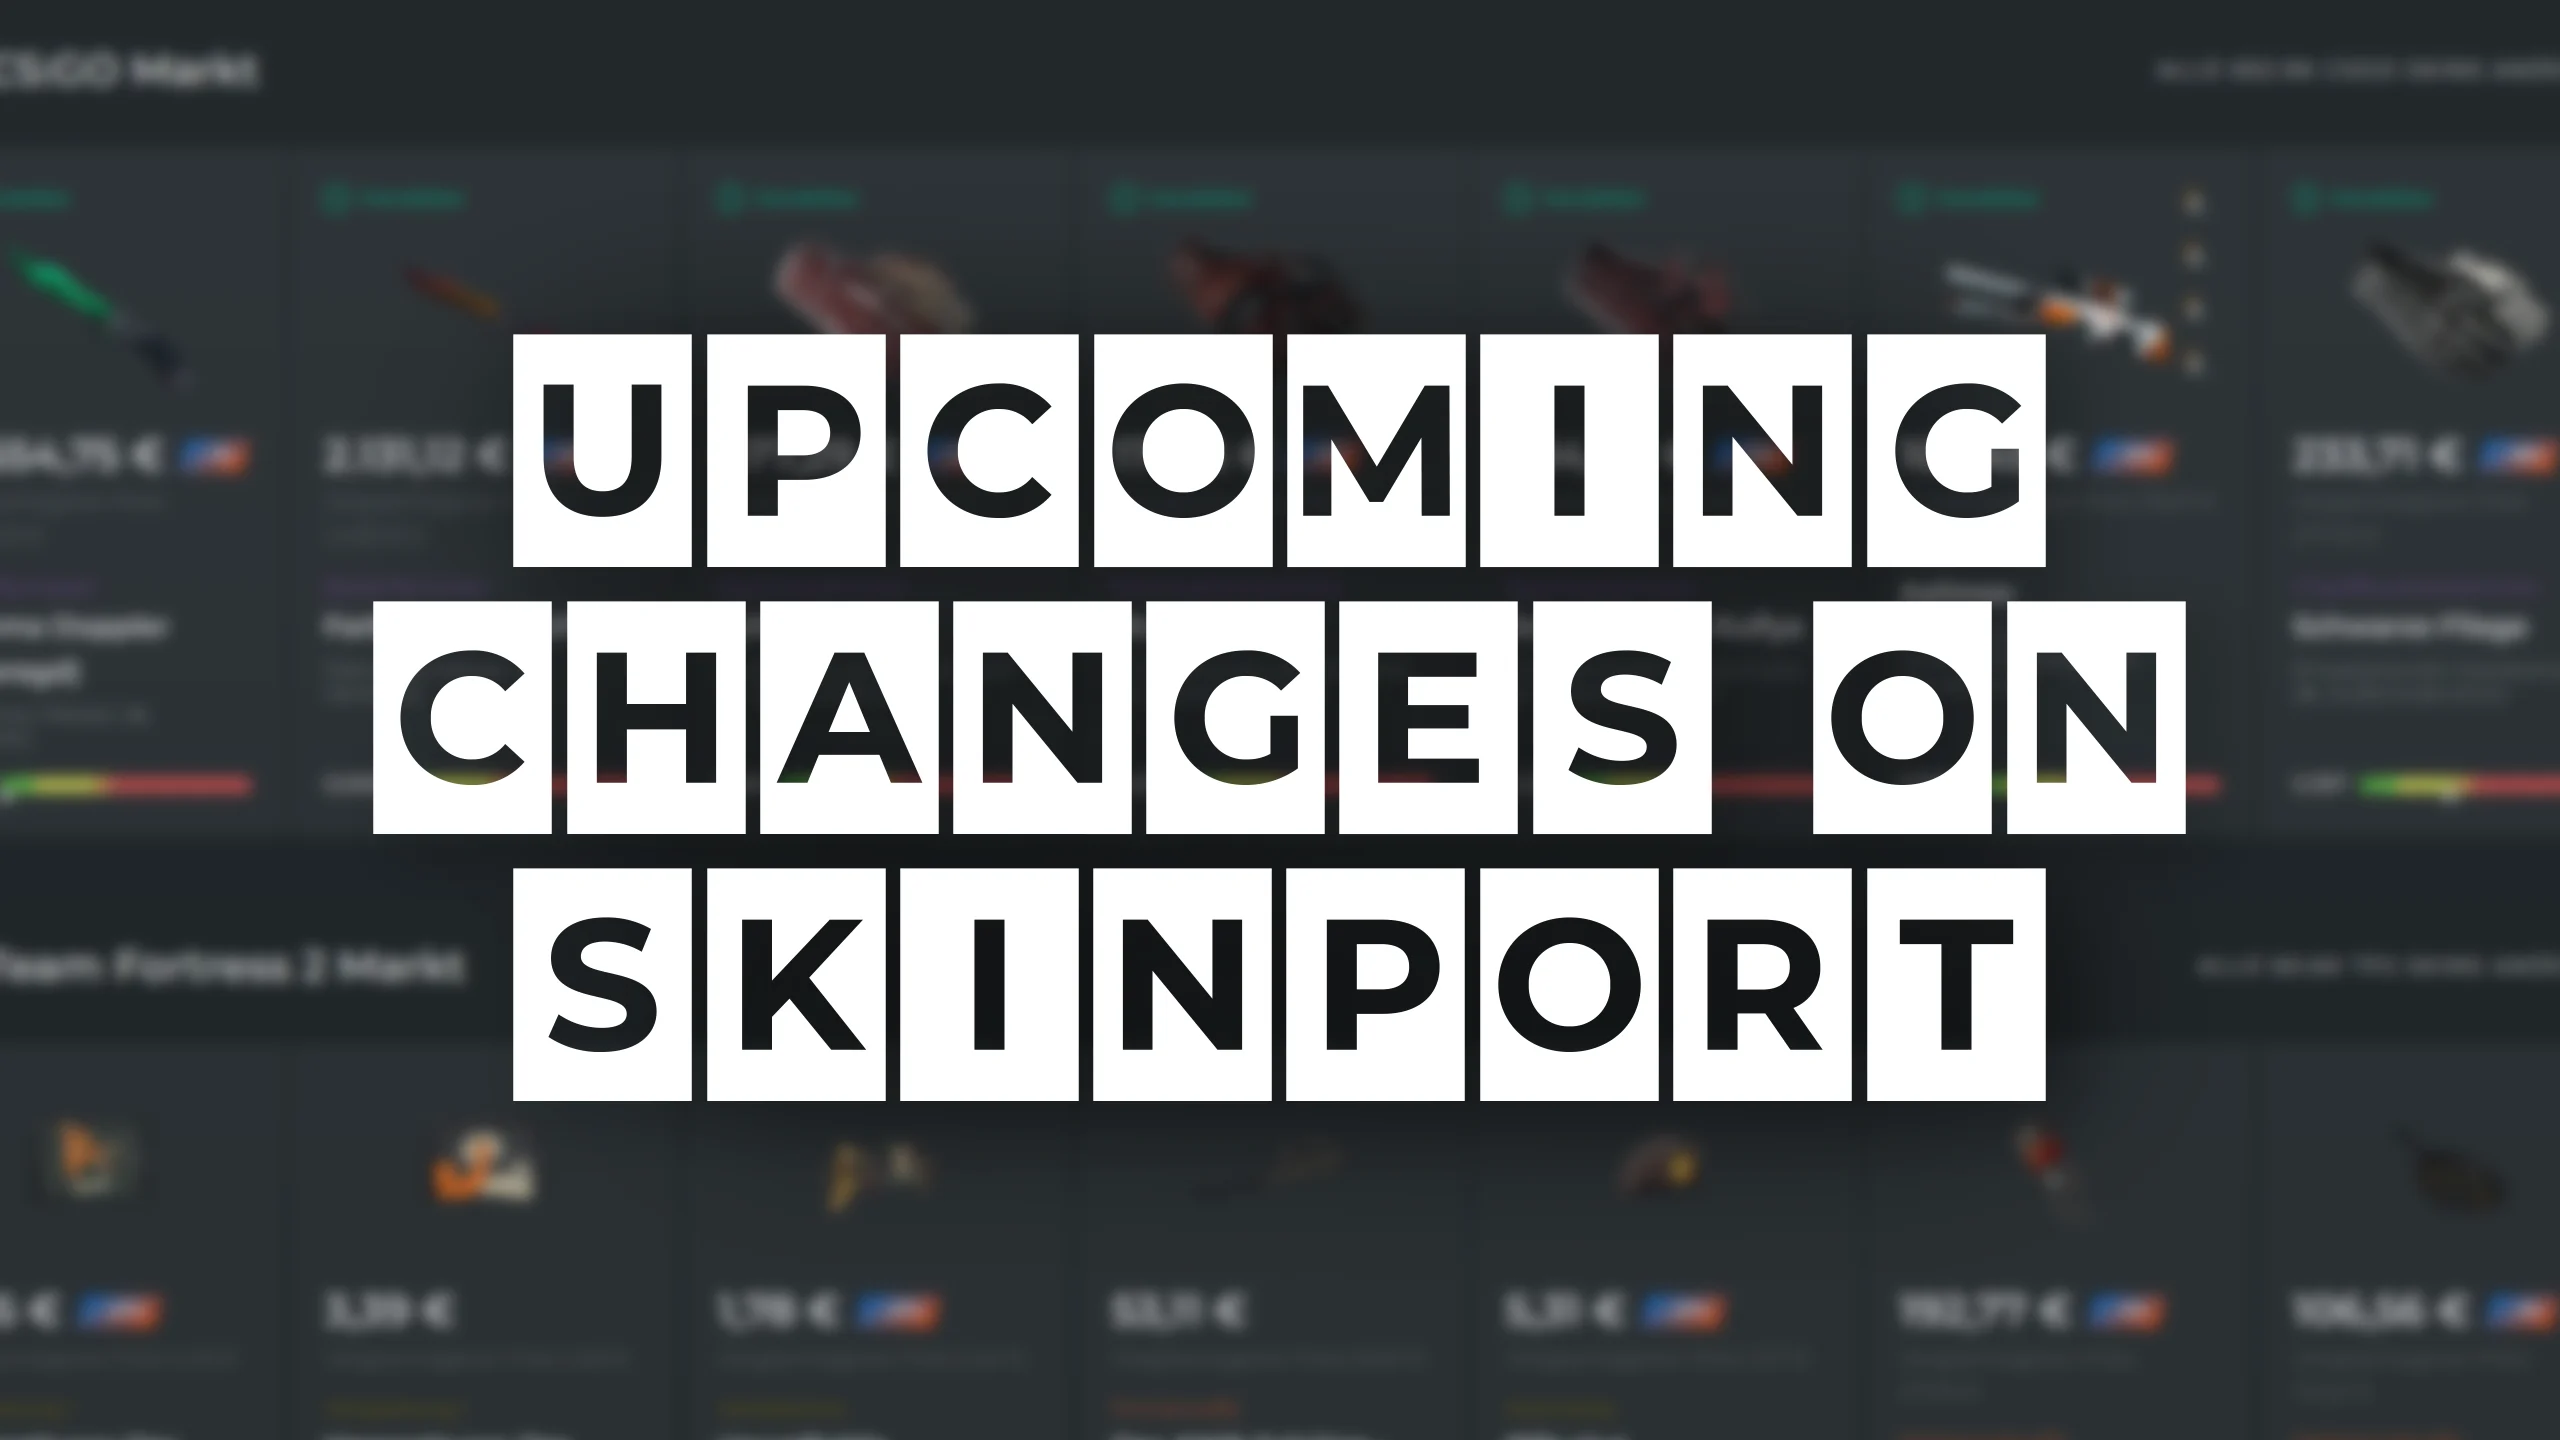 Upcoming Changes on Skinport